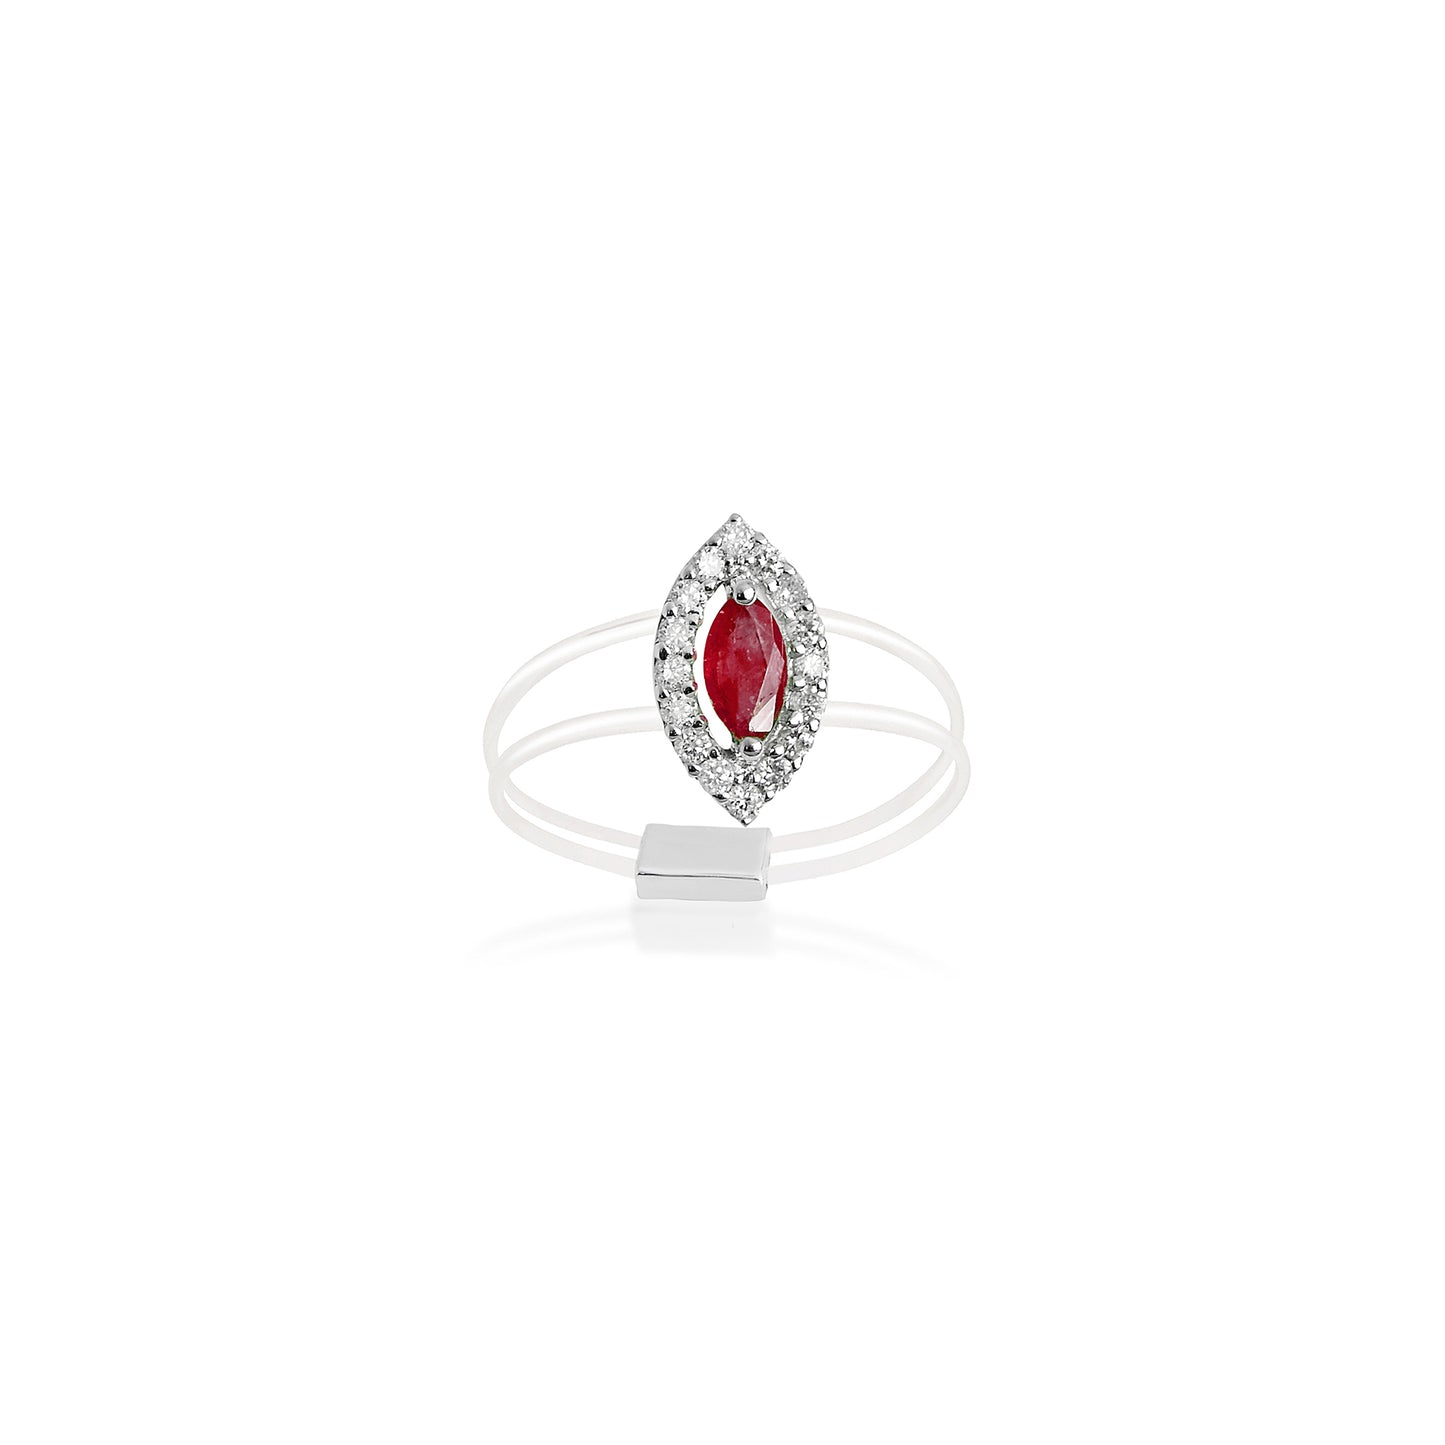 SPARKLE OVAL CUT RUBY RING